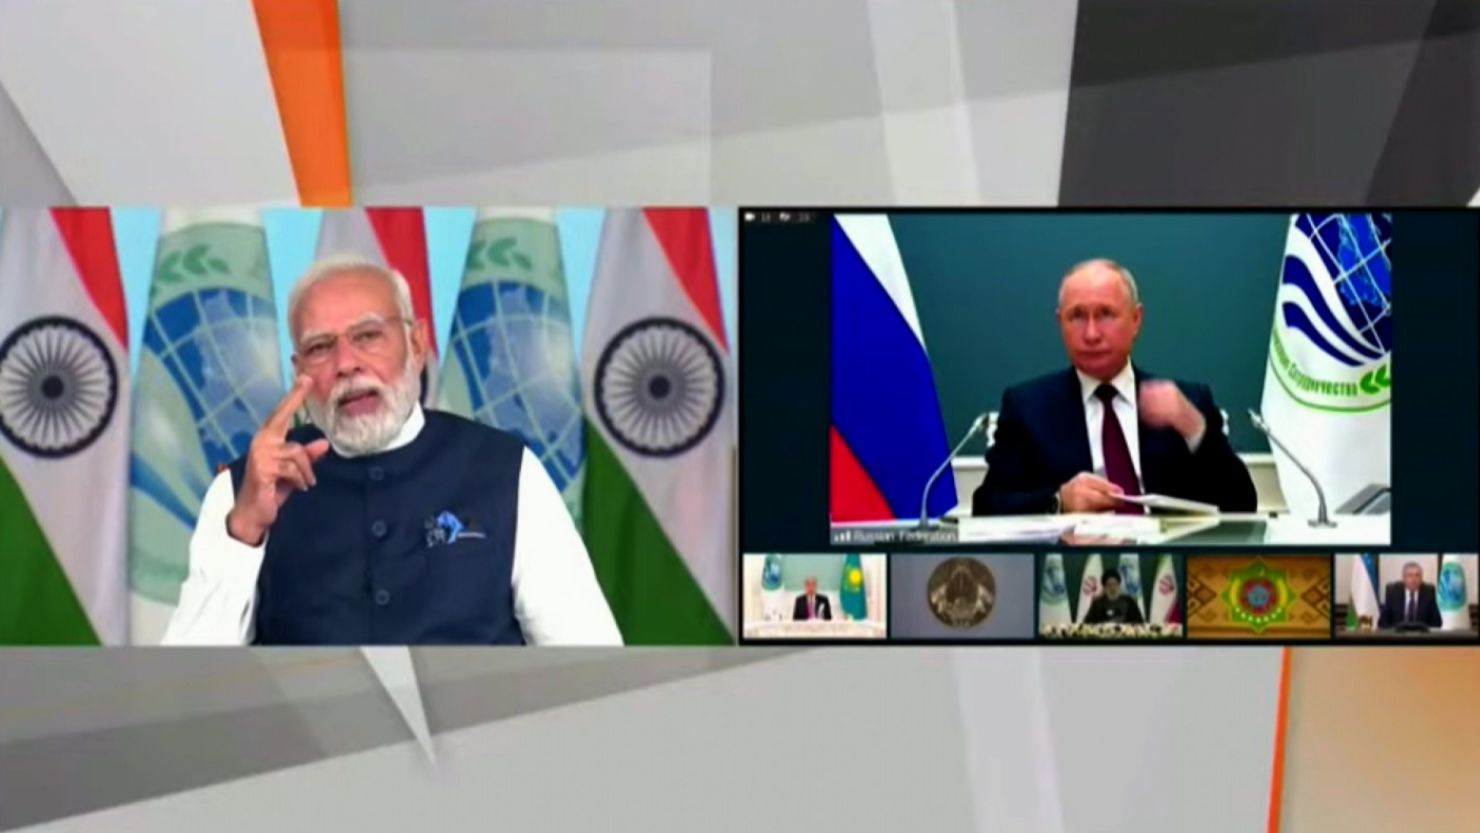 Indian Prime Minister Narendra Modi and Russian President Vladimir Putin pictured side-by-side at the virtual Shanghai Cooperation Organization summit on July 4.